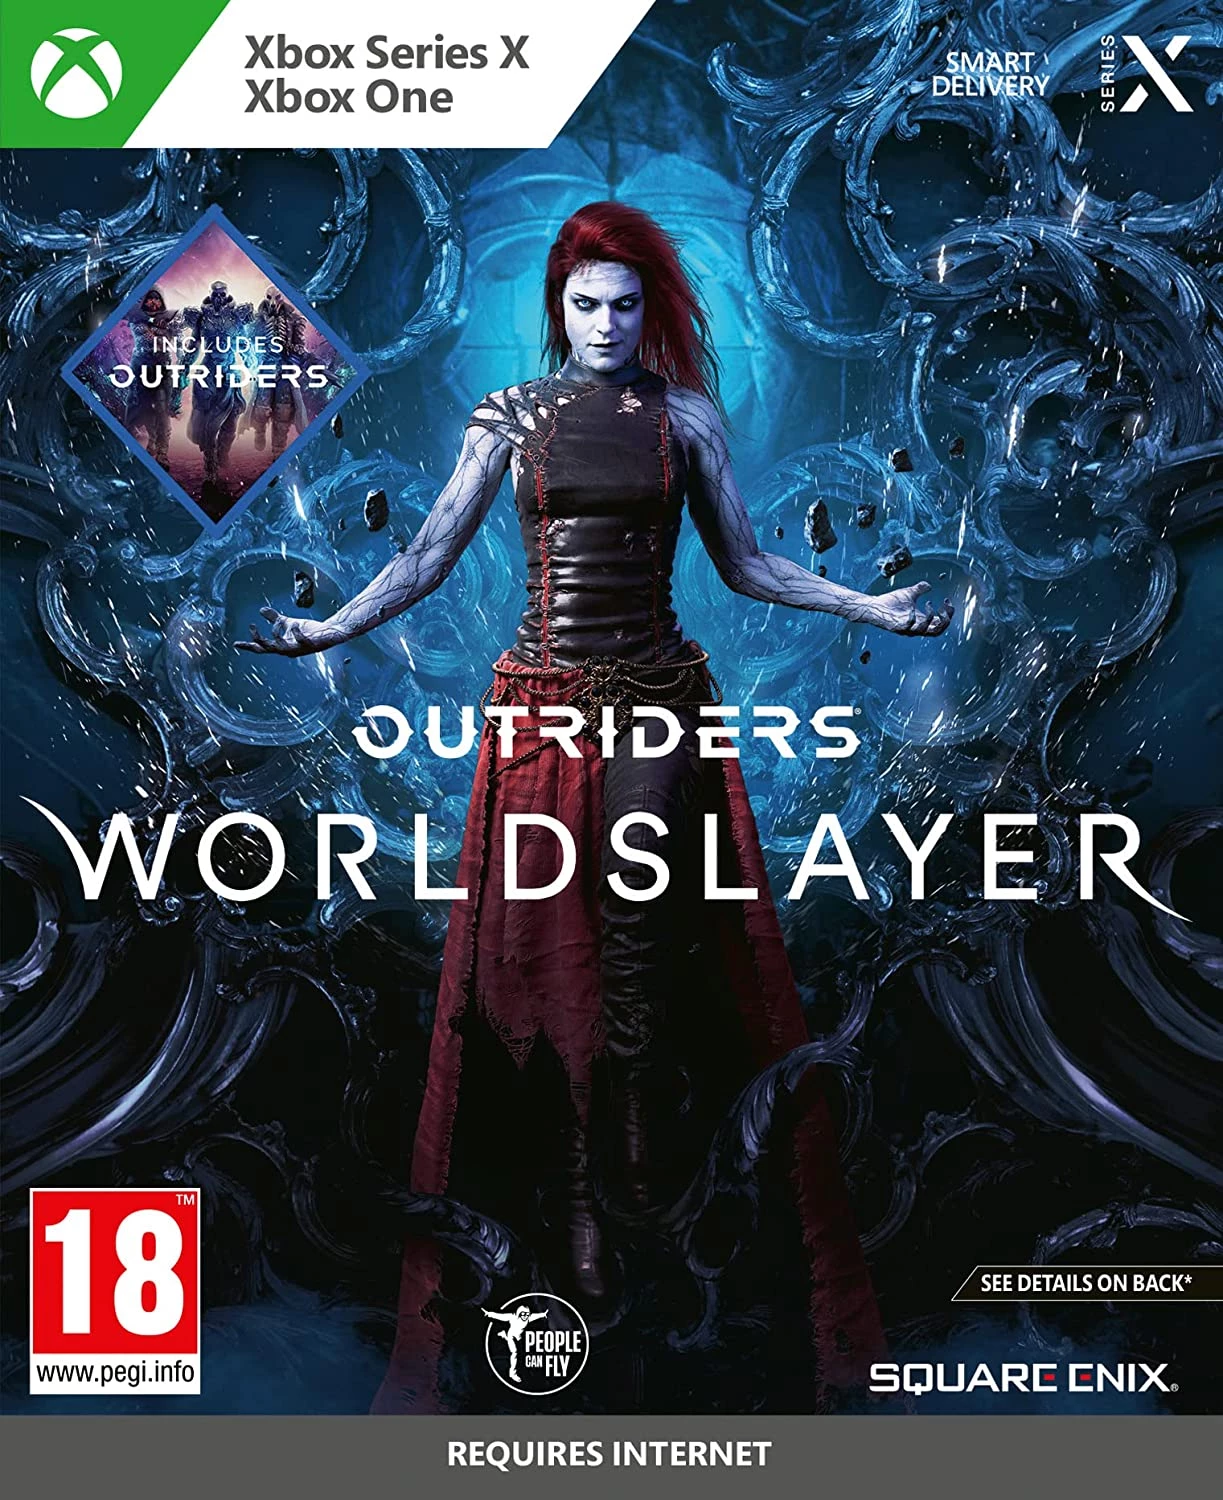 Outriders: Worldslayer (Xbox Series X), Square Enix